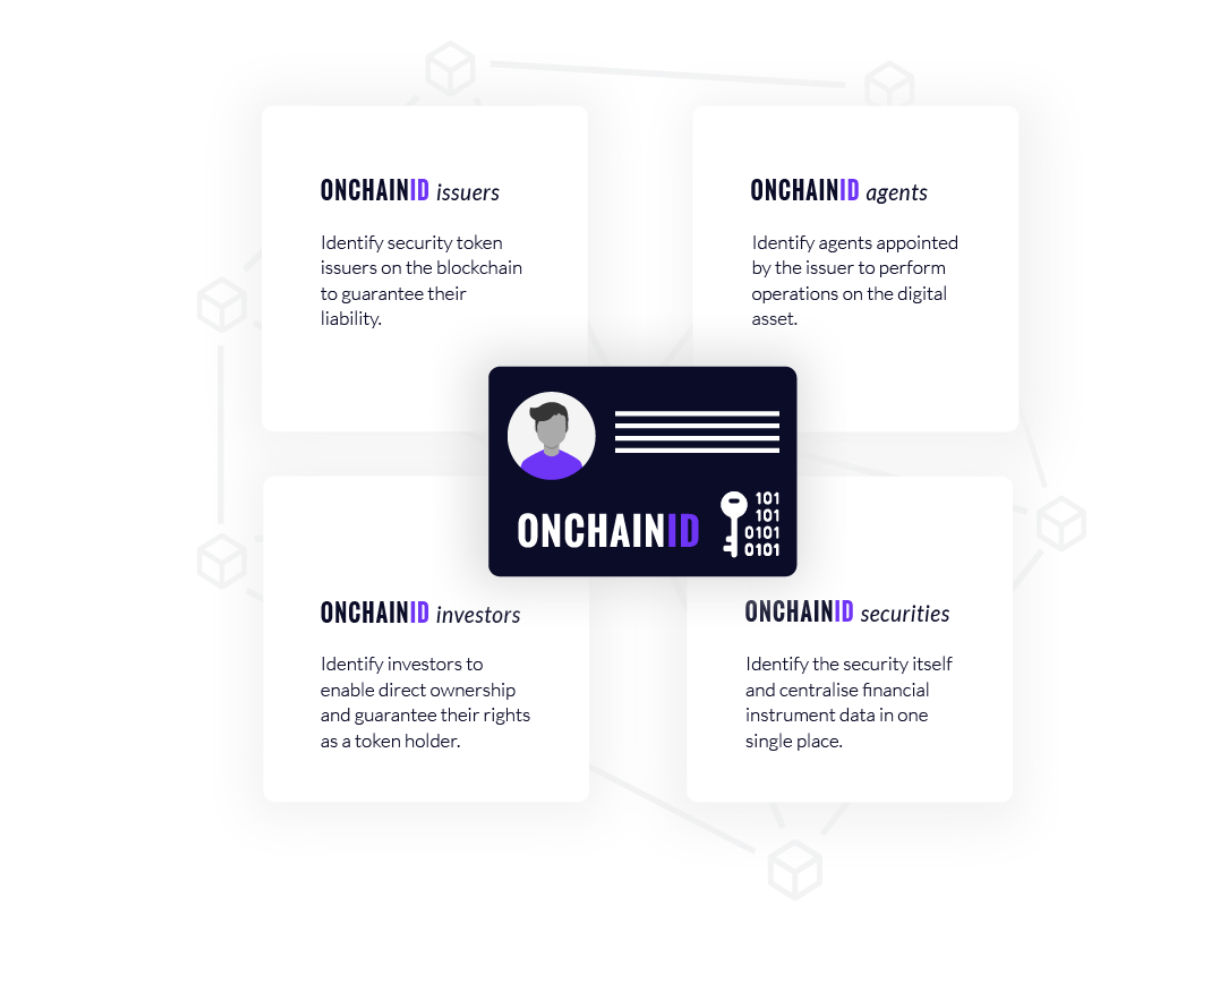 various use cases of ONCHAINID